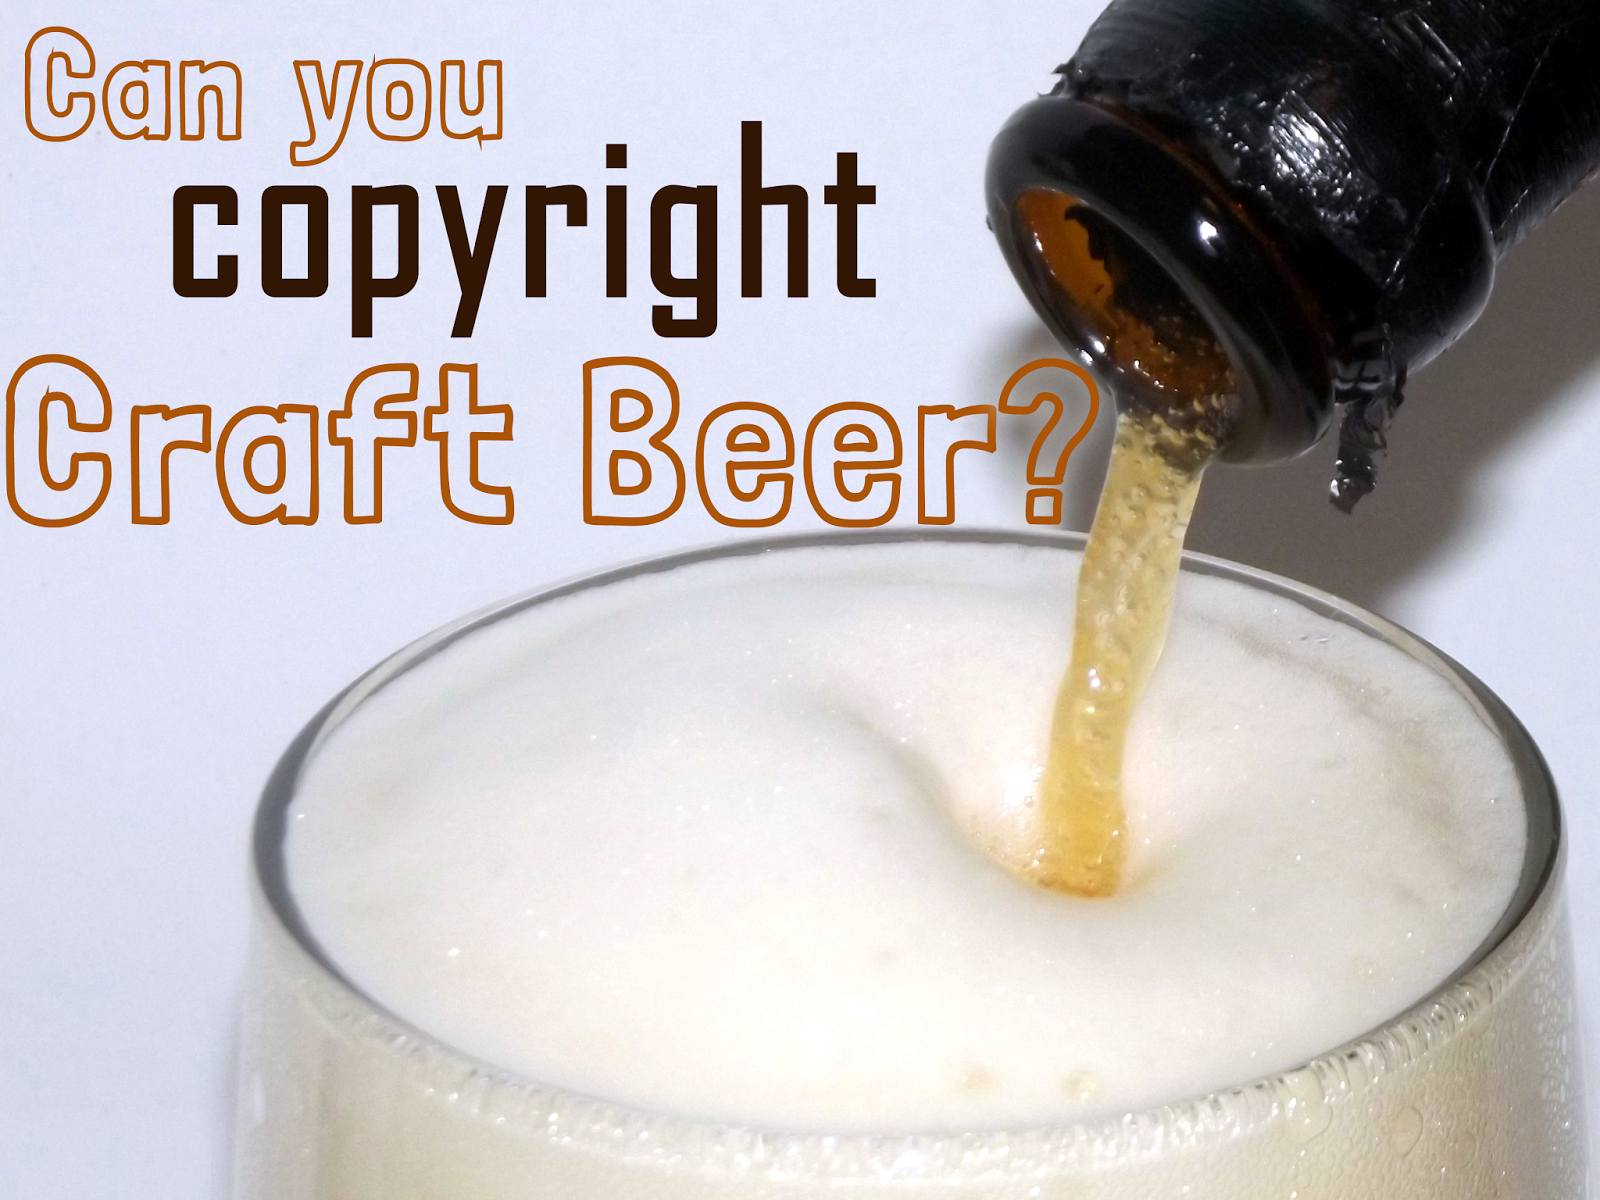 Can you Copyright Craftbeer?